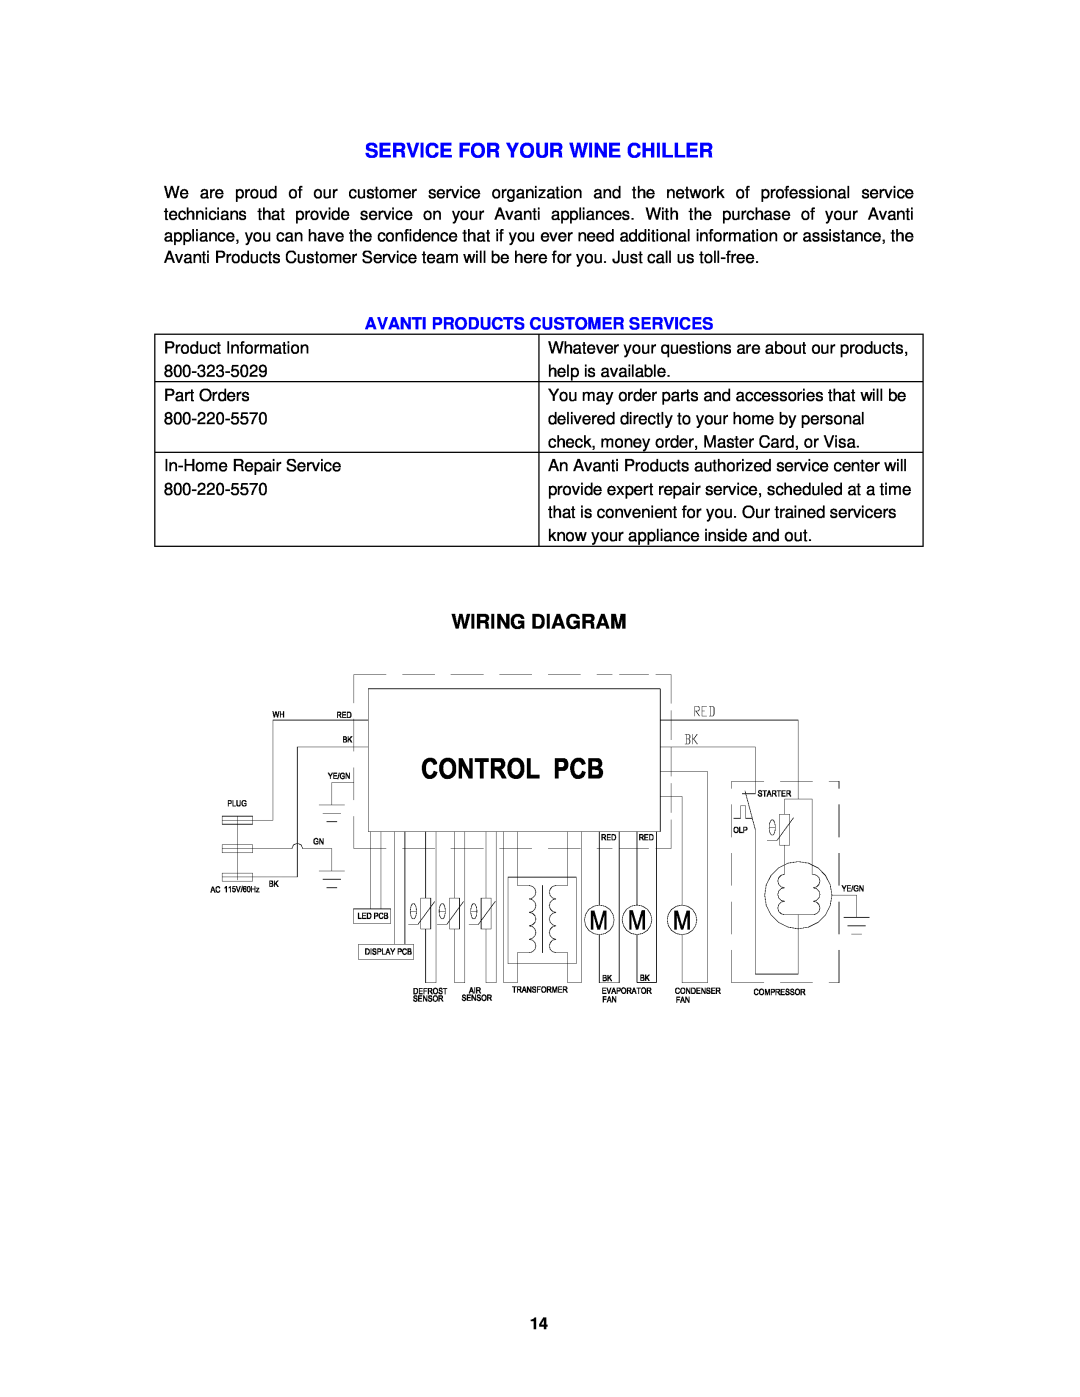 Avanti WCR682SS-2 instruction manual Service For Your Wine Chiller, Wiring Diagram, Avanti Products Customer Services 